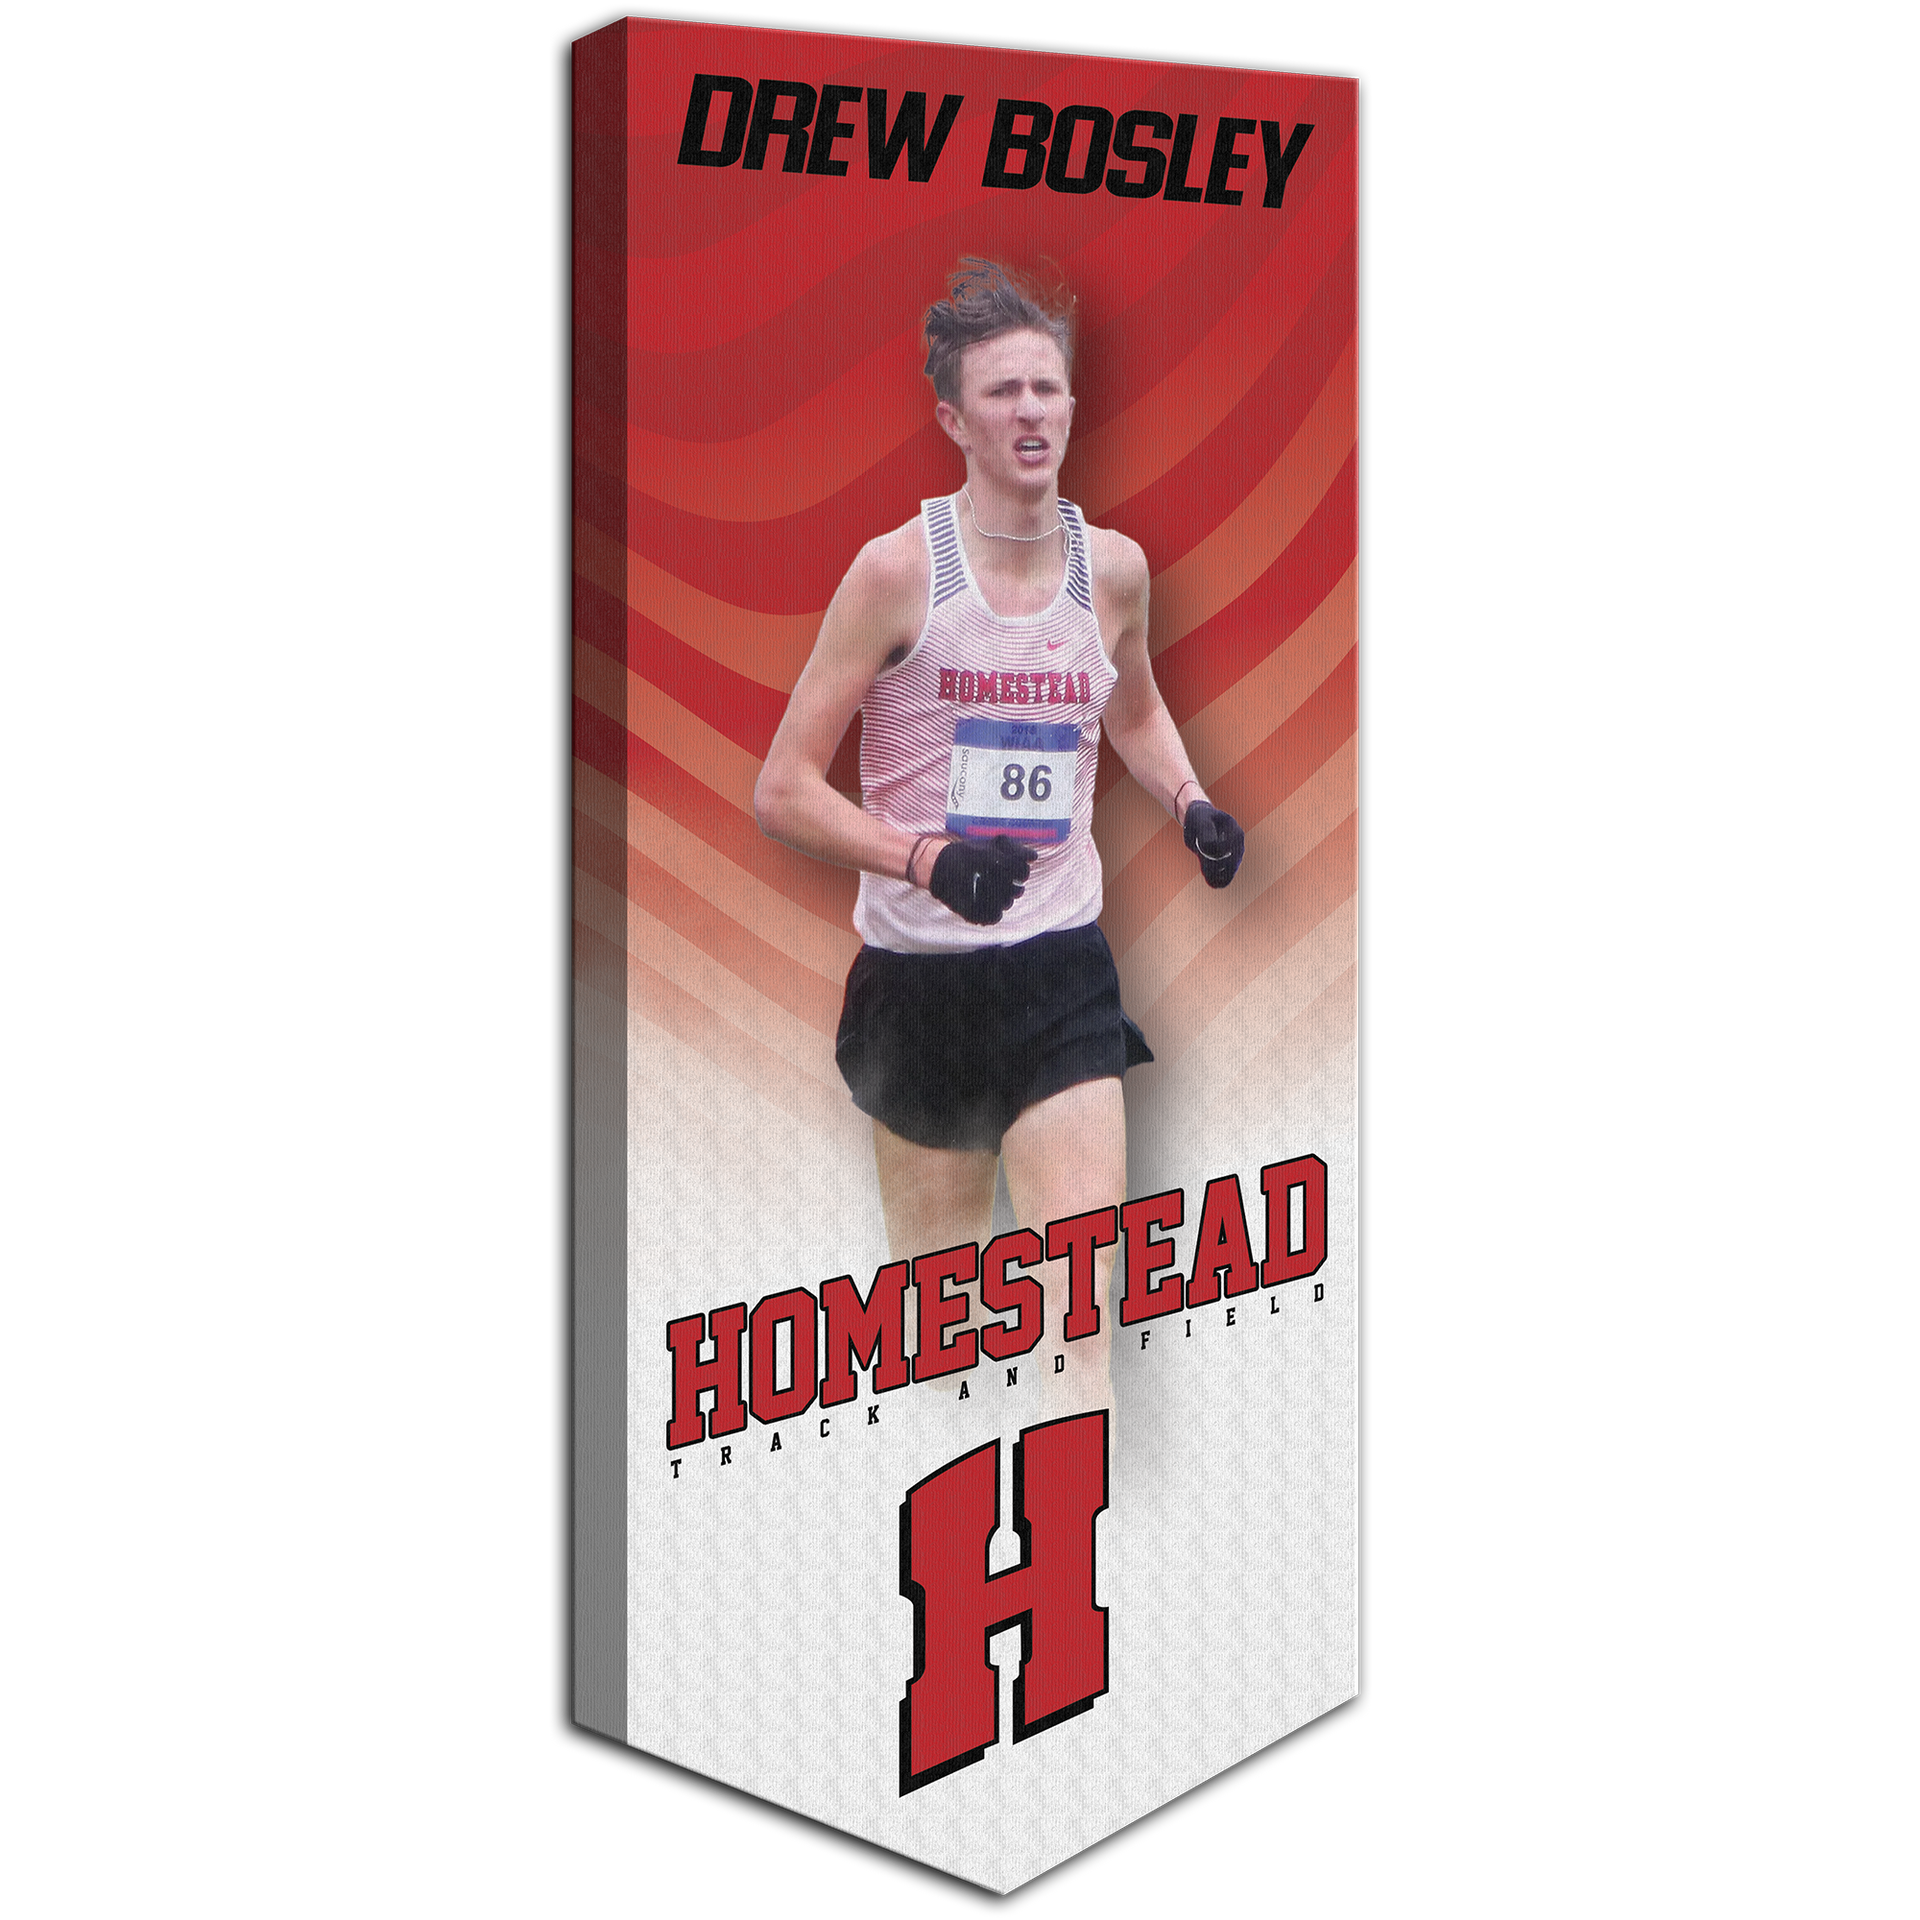 Collectible Canvas Whitewash Template for Drew Bosley Homestead Track